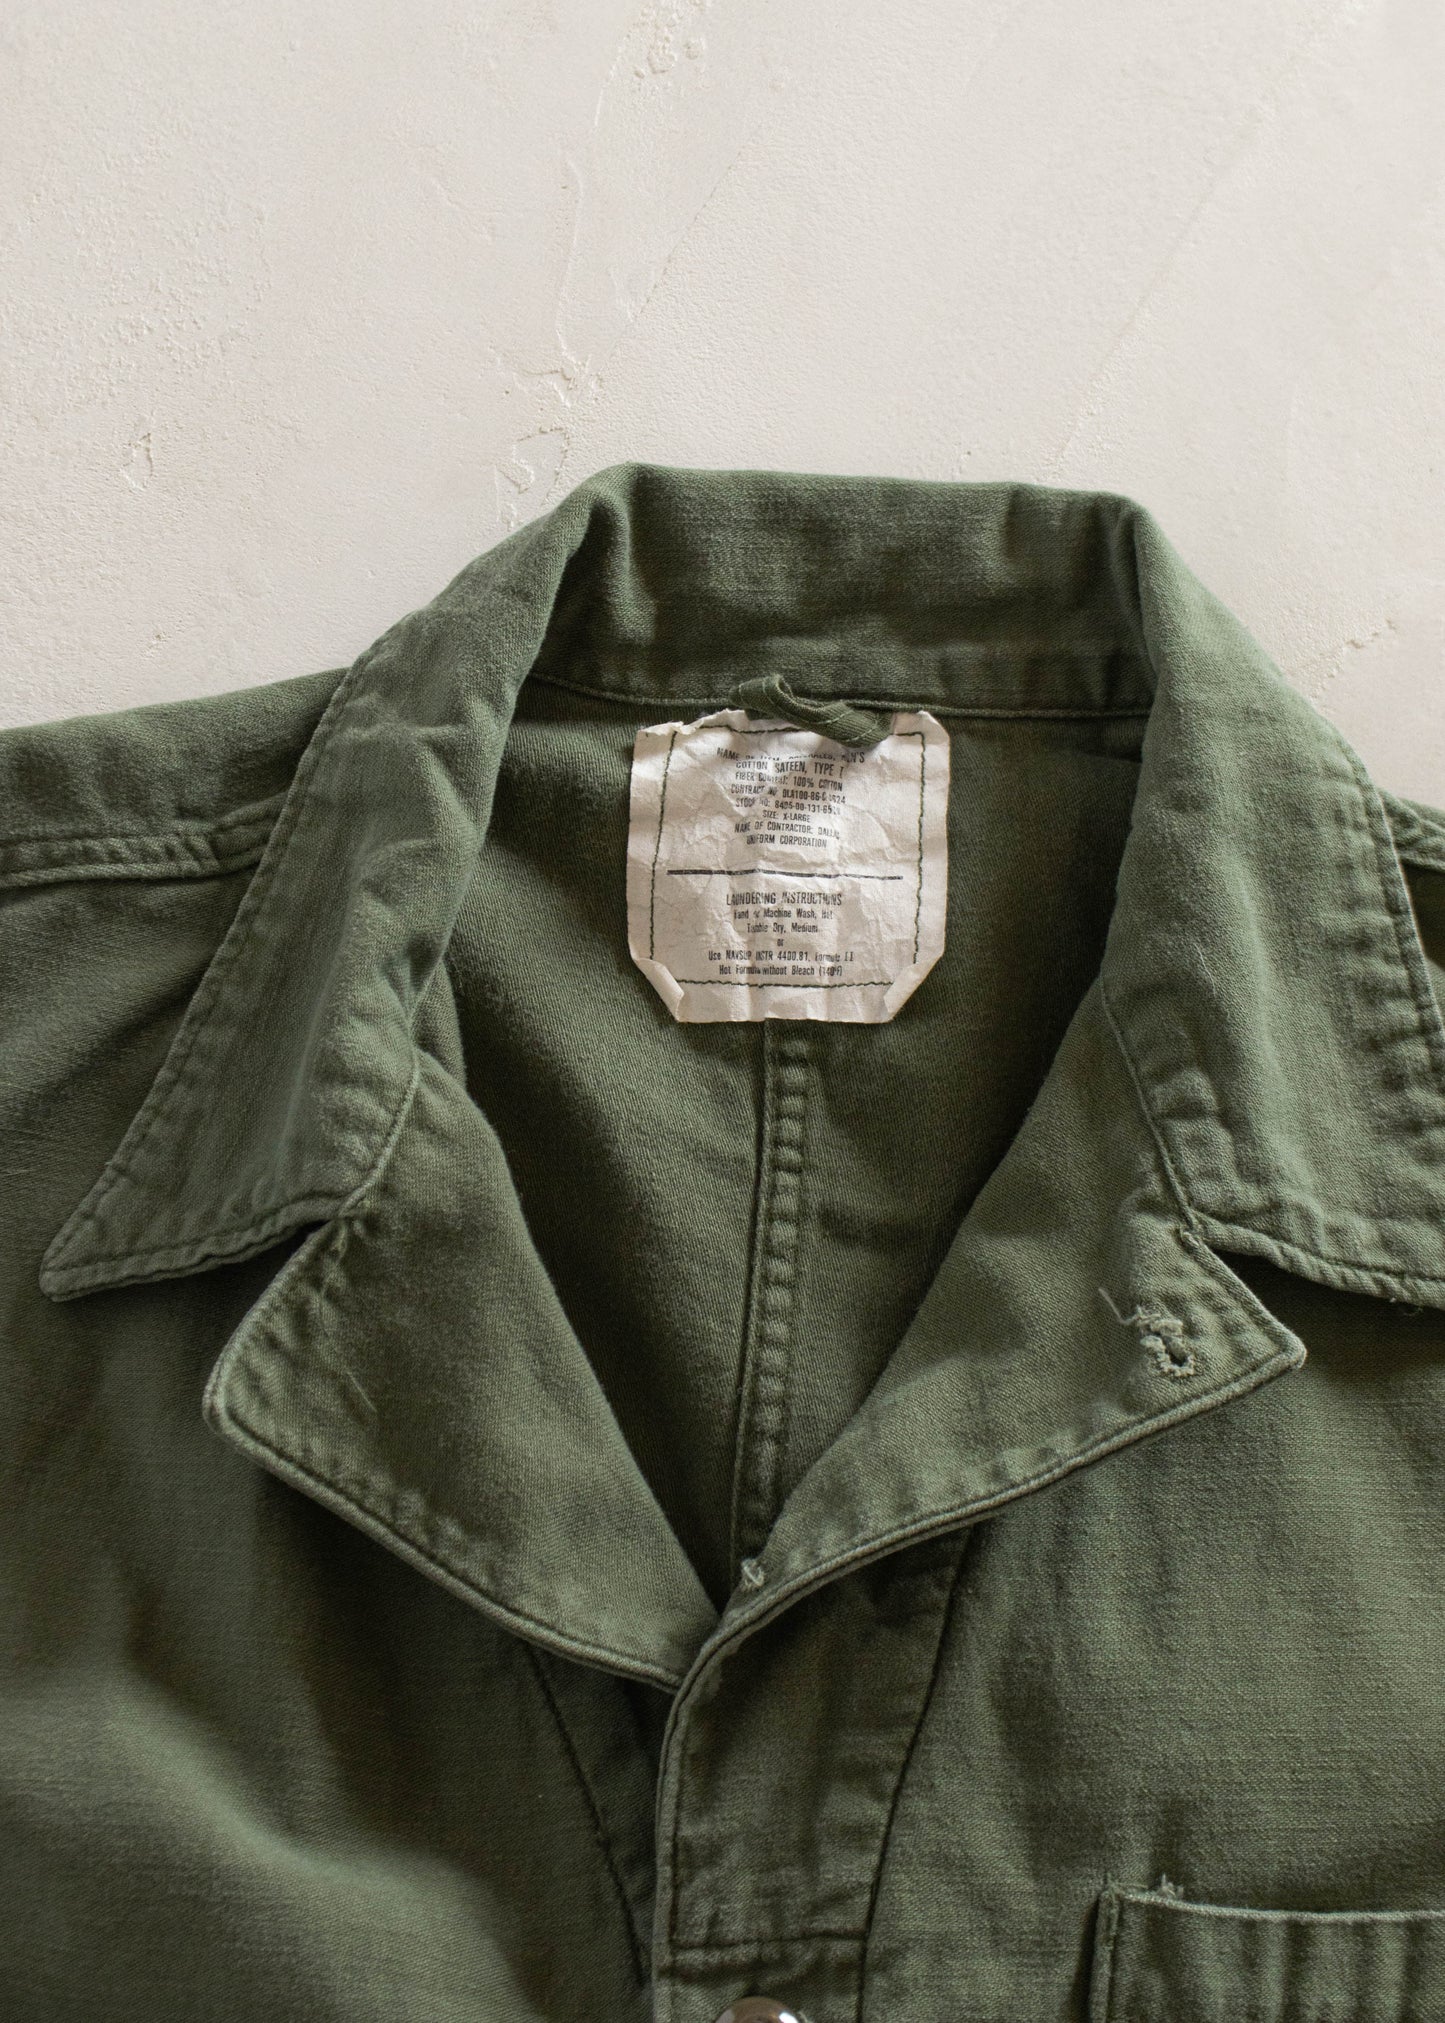 1970s OG 107 Type I Coveralls Size XL/2XL